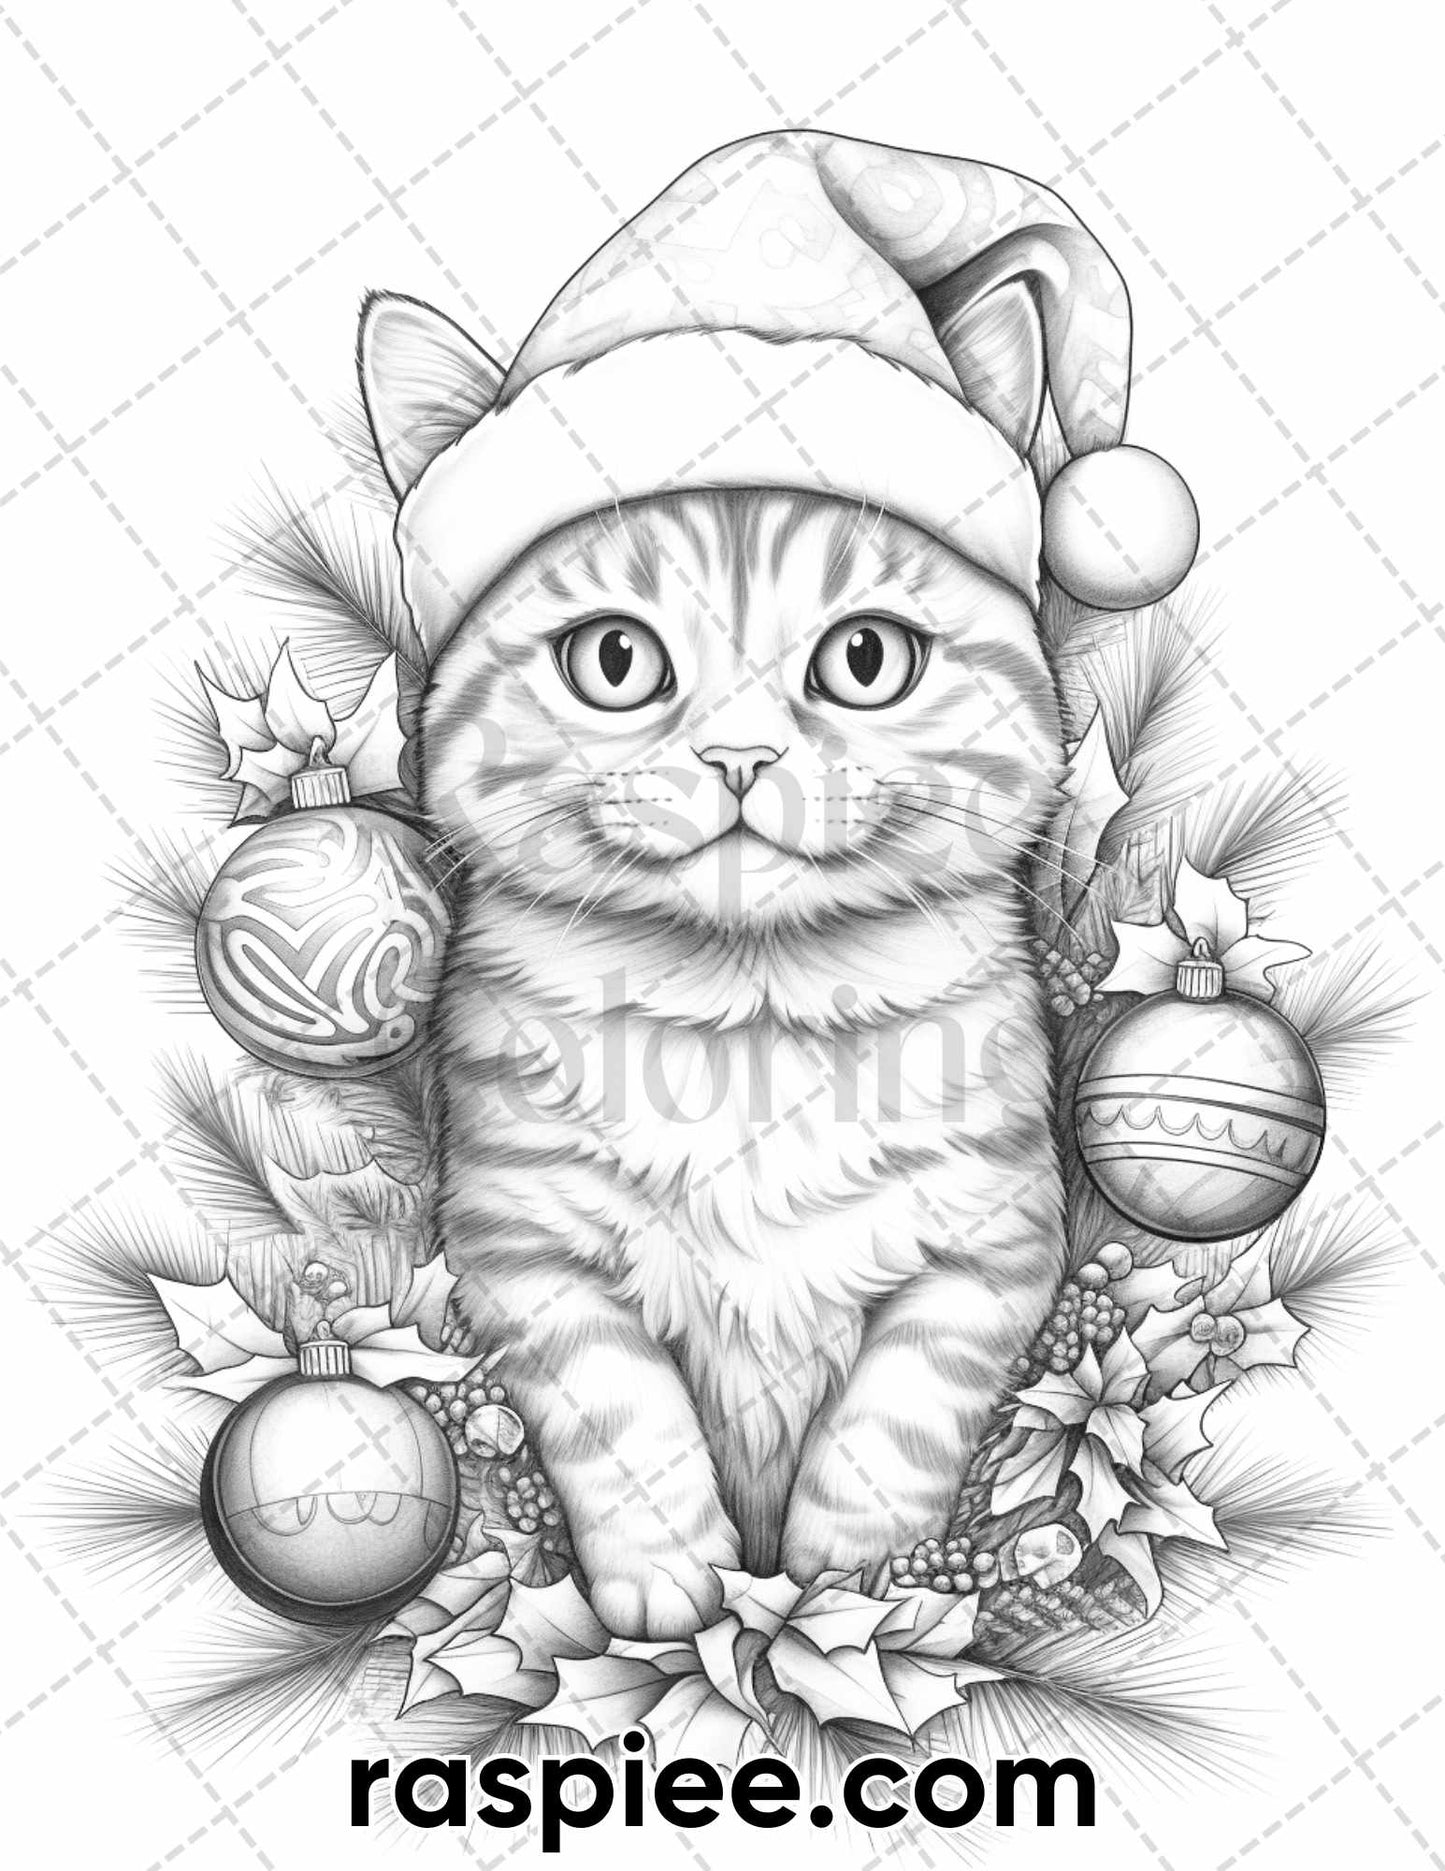 40 Christmas Cats Grayscale Coloring Pages for Adults, Printable PDF Instant Download